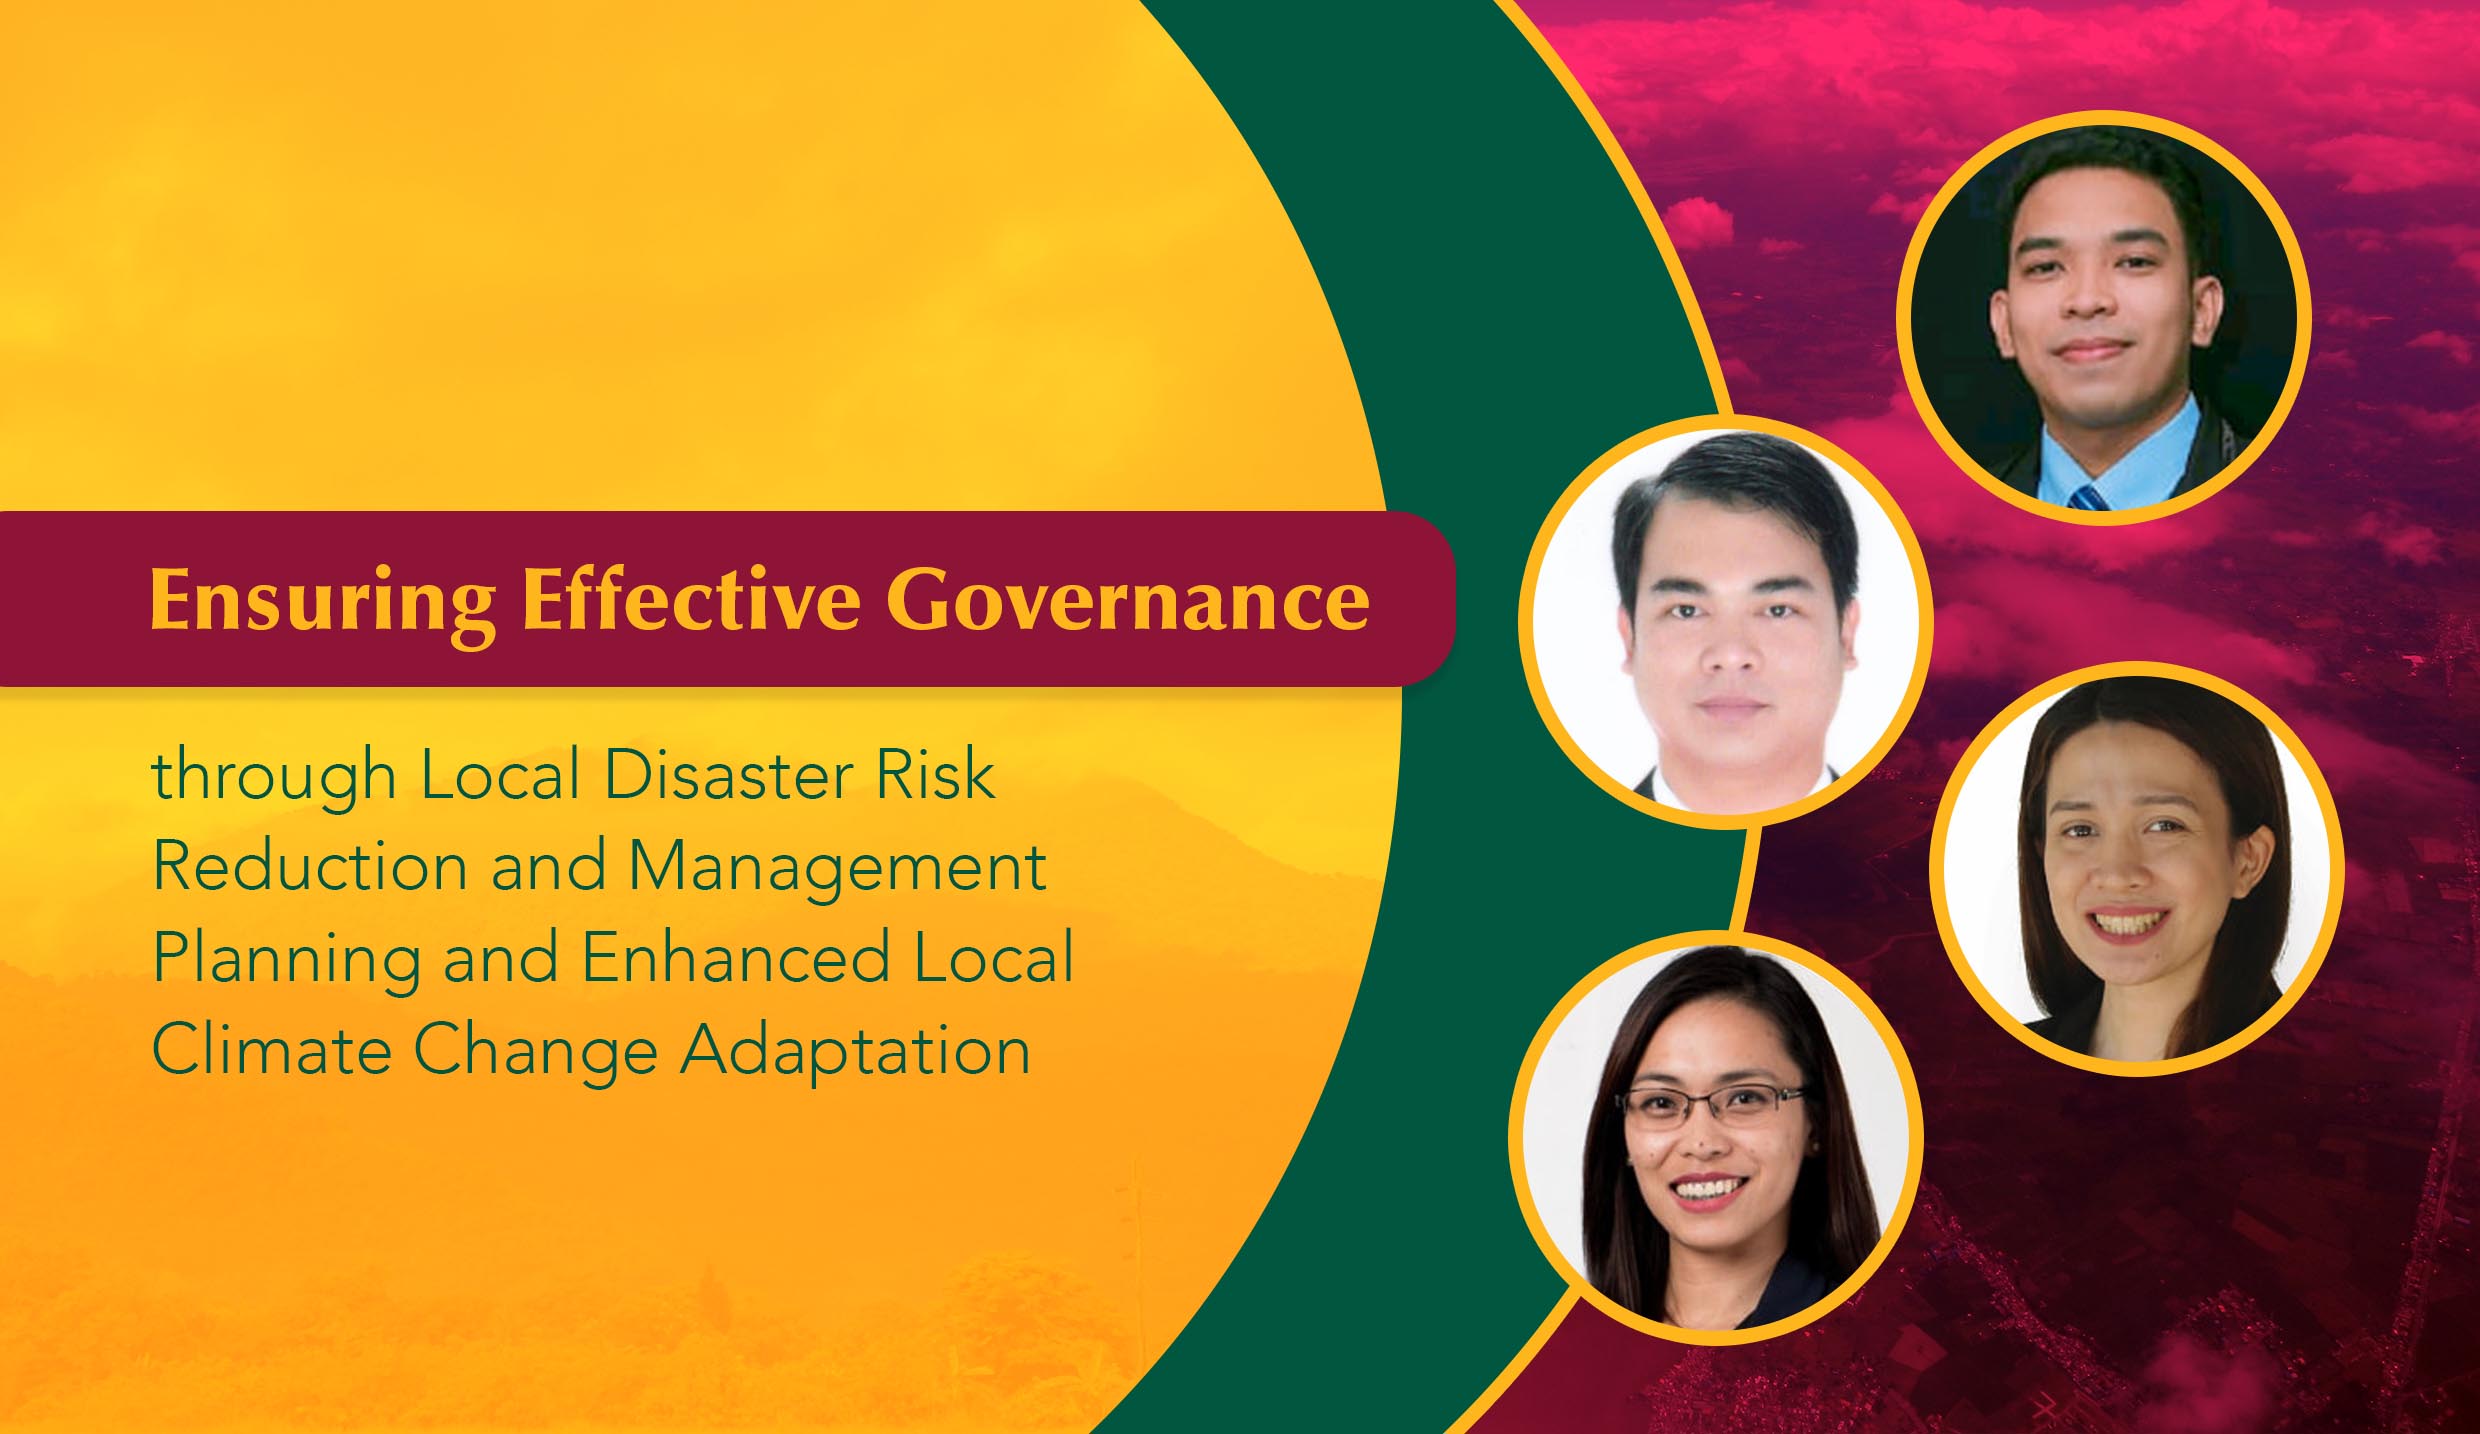 Effective governance highlighted for climate change and disaster response